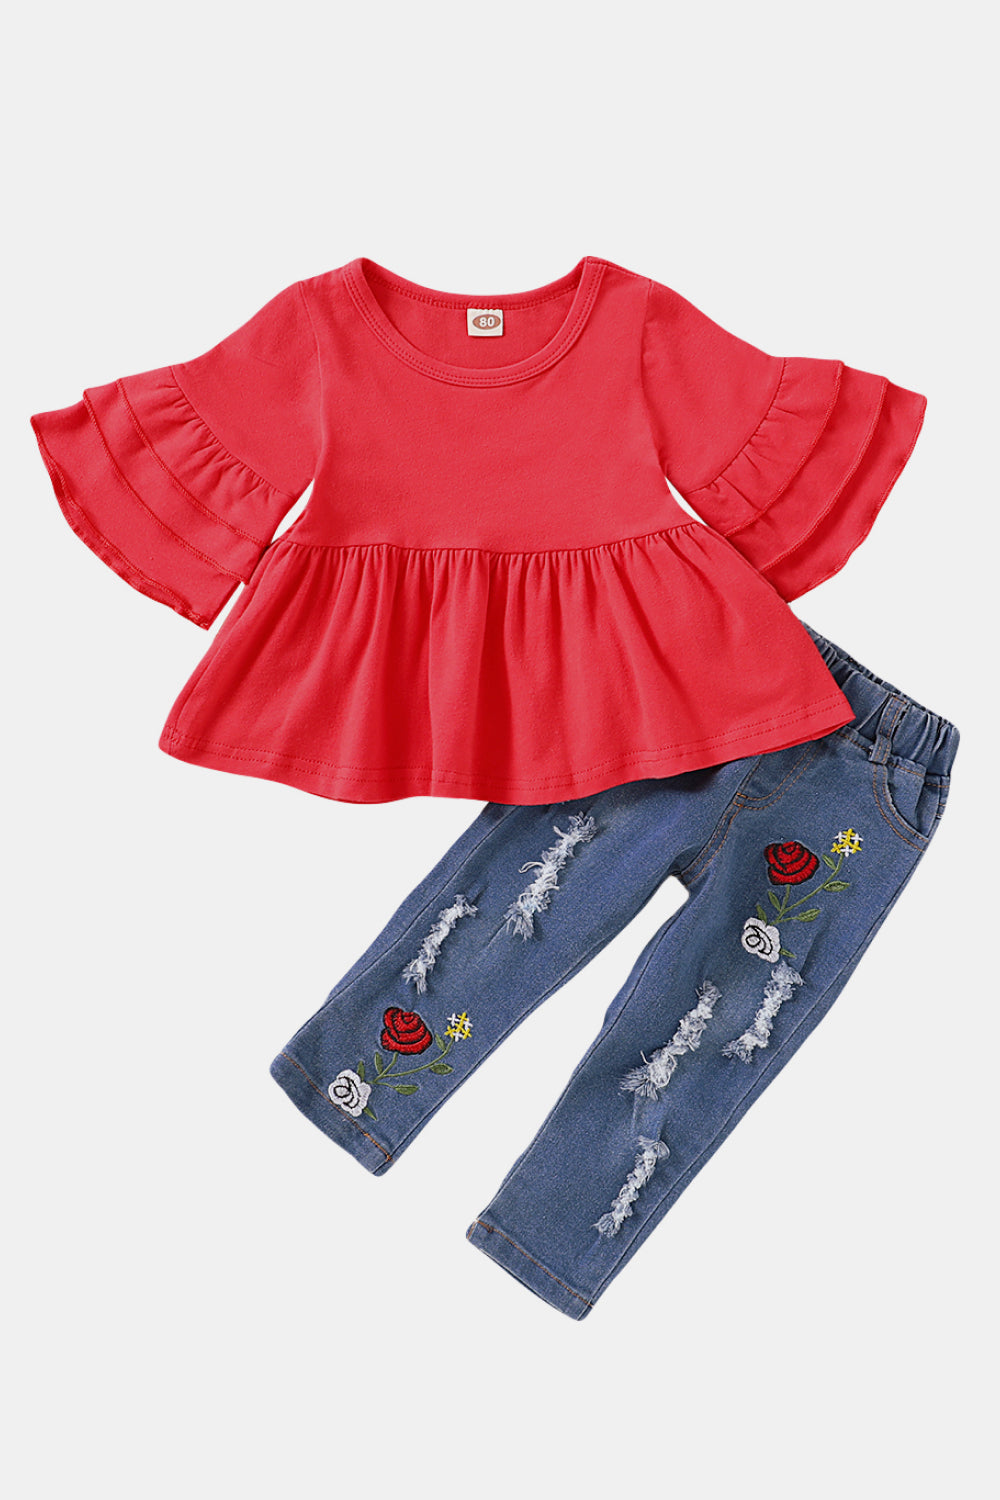 Toddler Peplum Top and Embroidered Jeans set_0